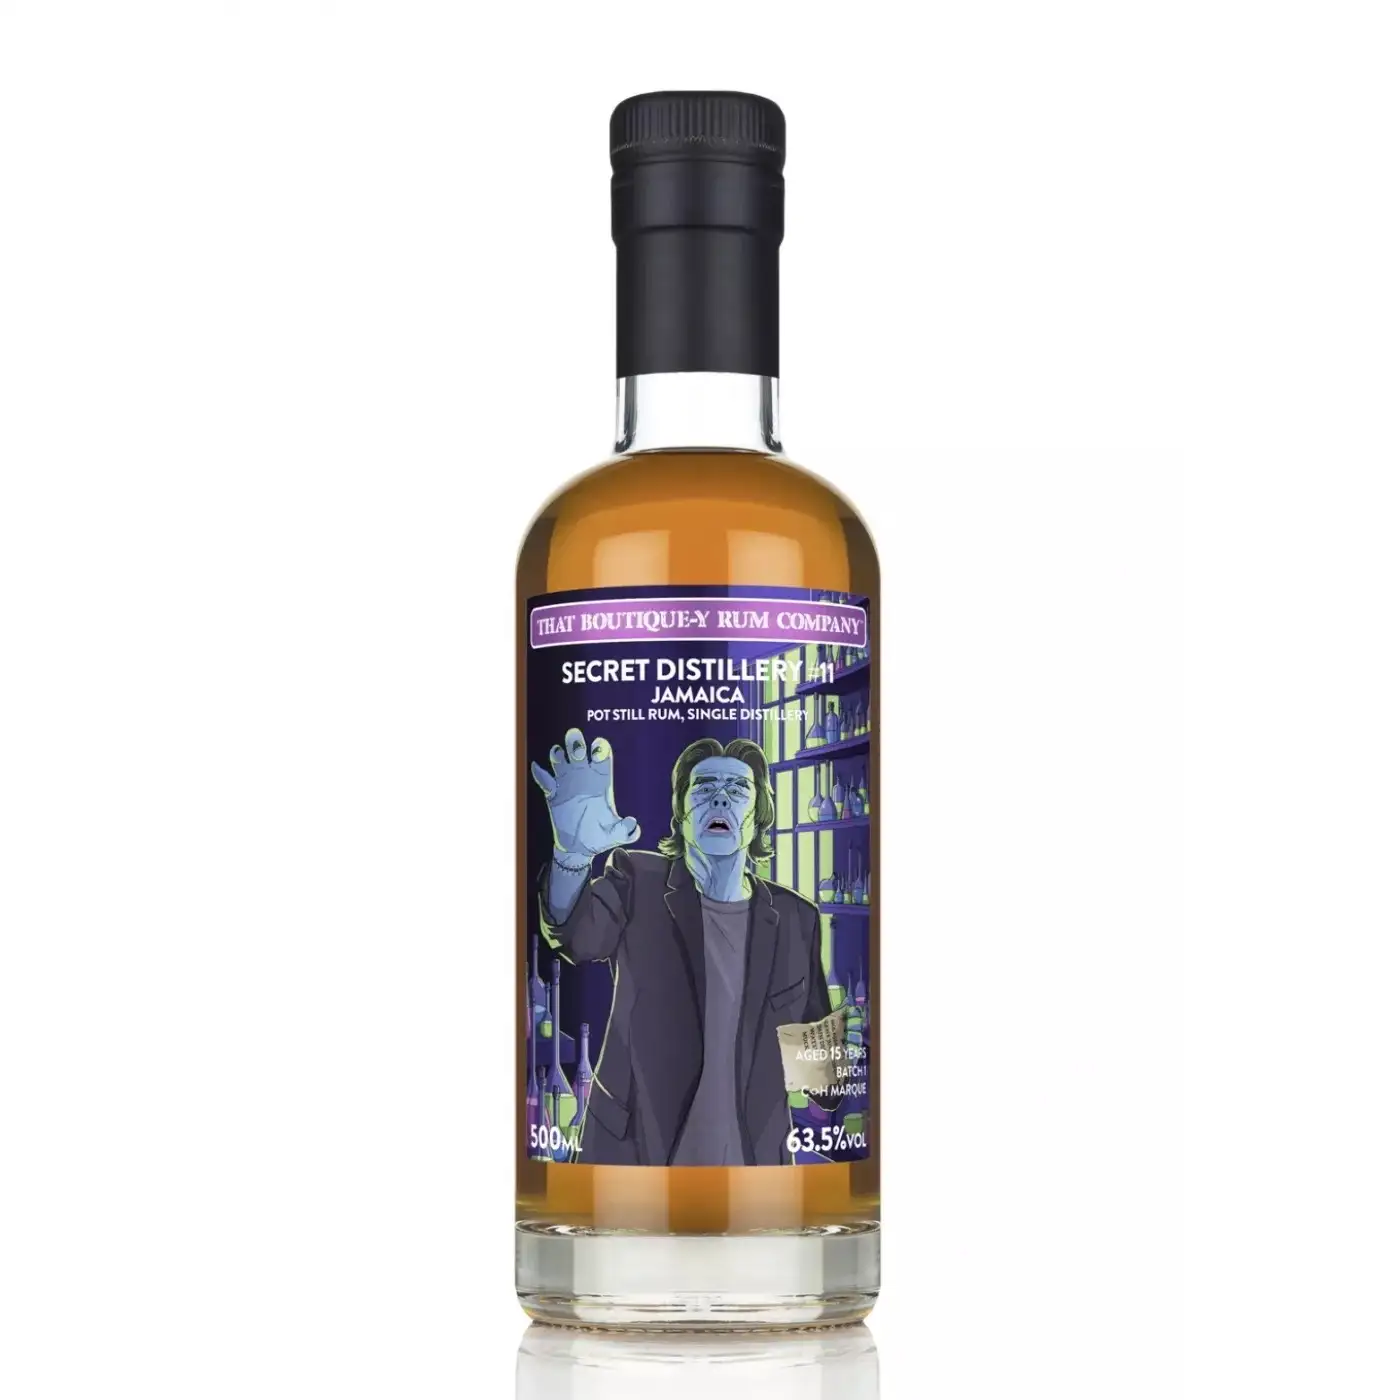 Image of the front of the bottle of the rum Secret Distillery #11 C<>H